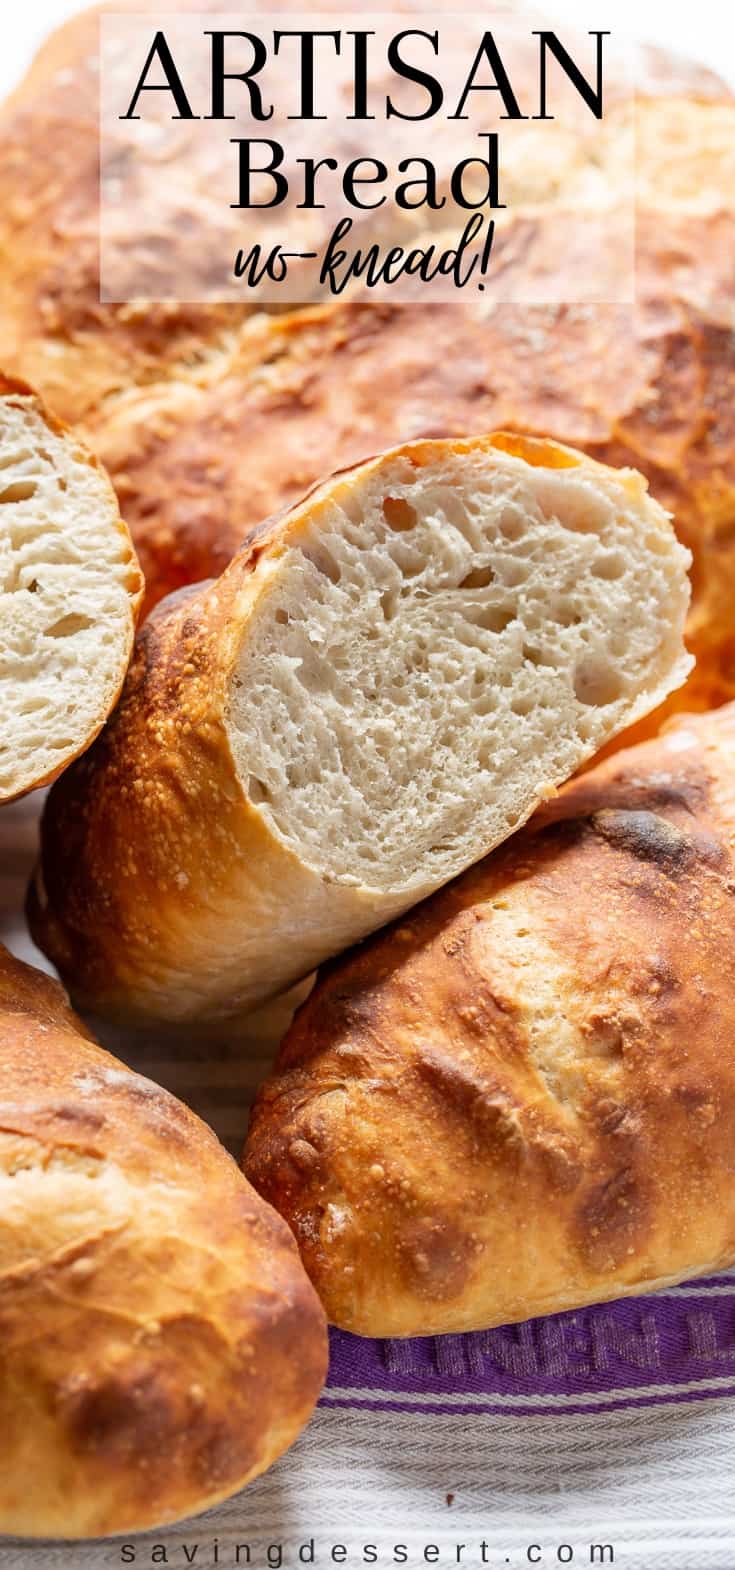 Close up of Artisan bread sliced to show the texture and structure of inside